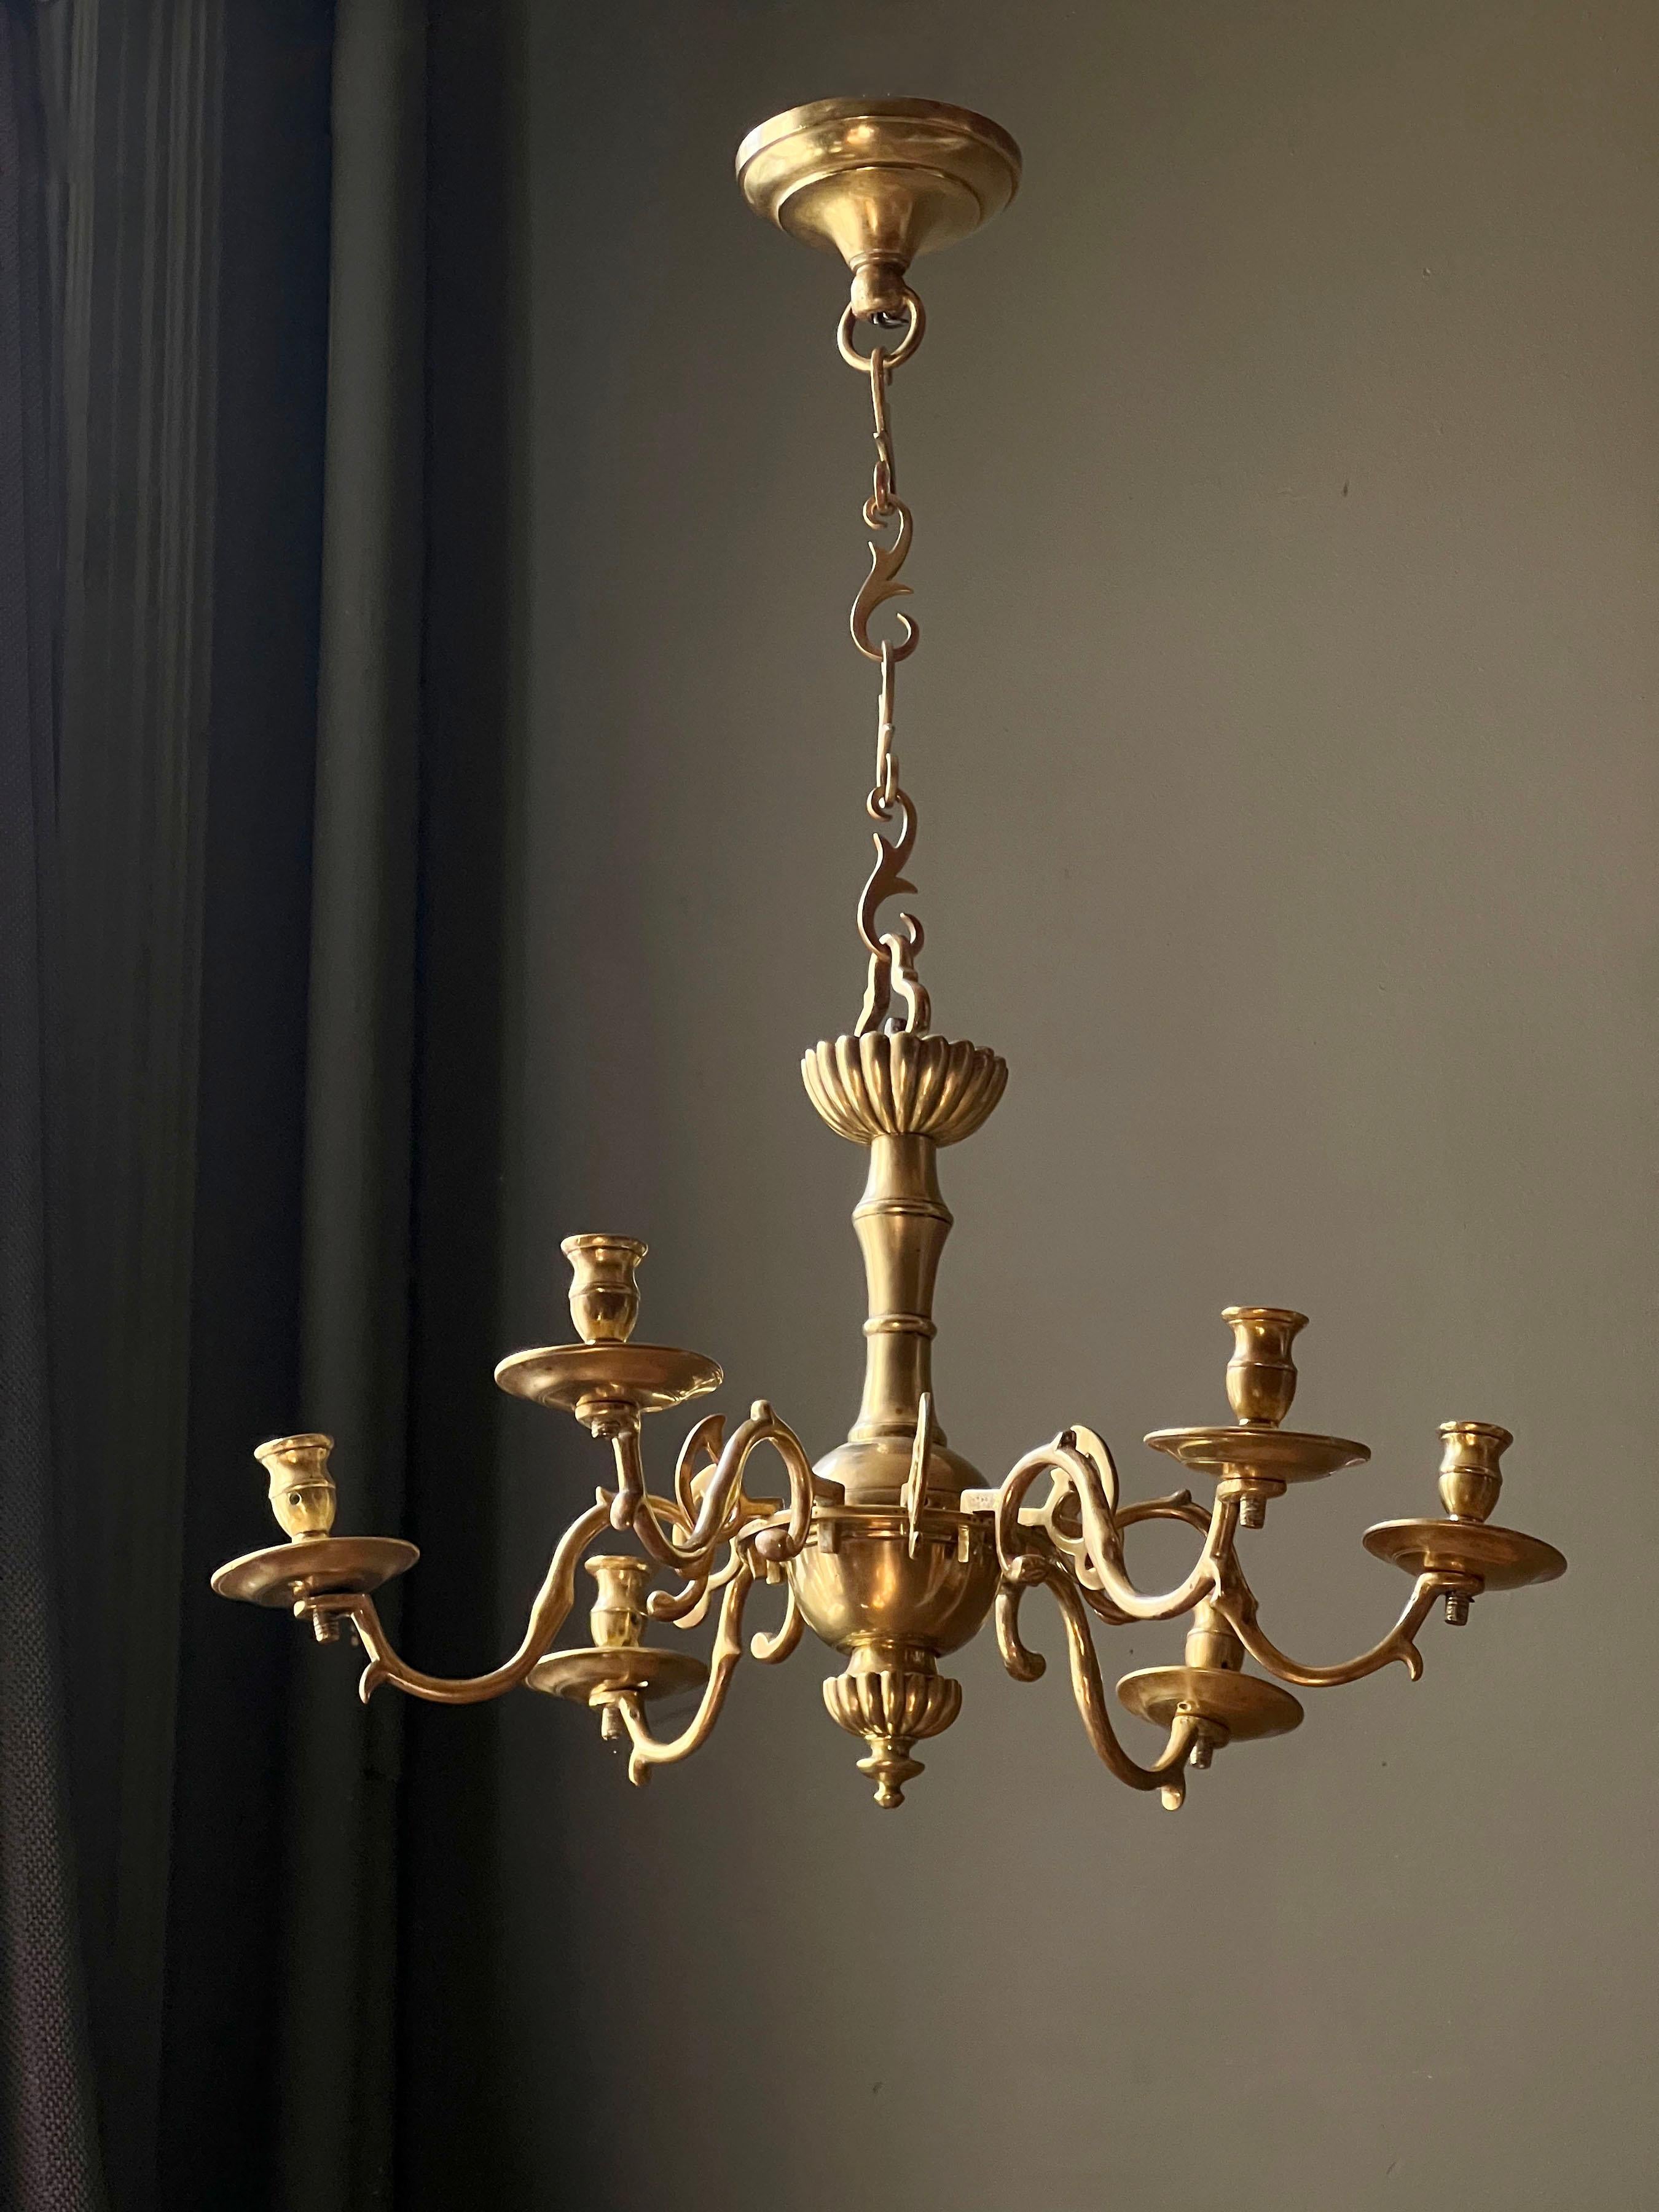 Mid-18th Century English Brass Six-light Chandelier For Sale 3